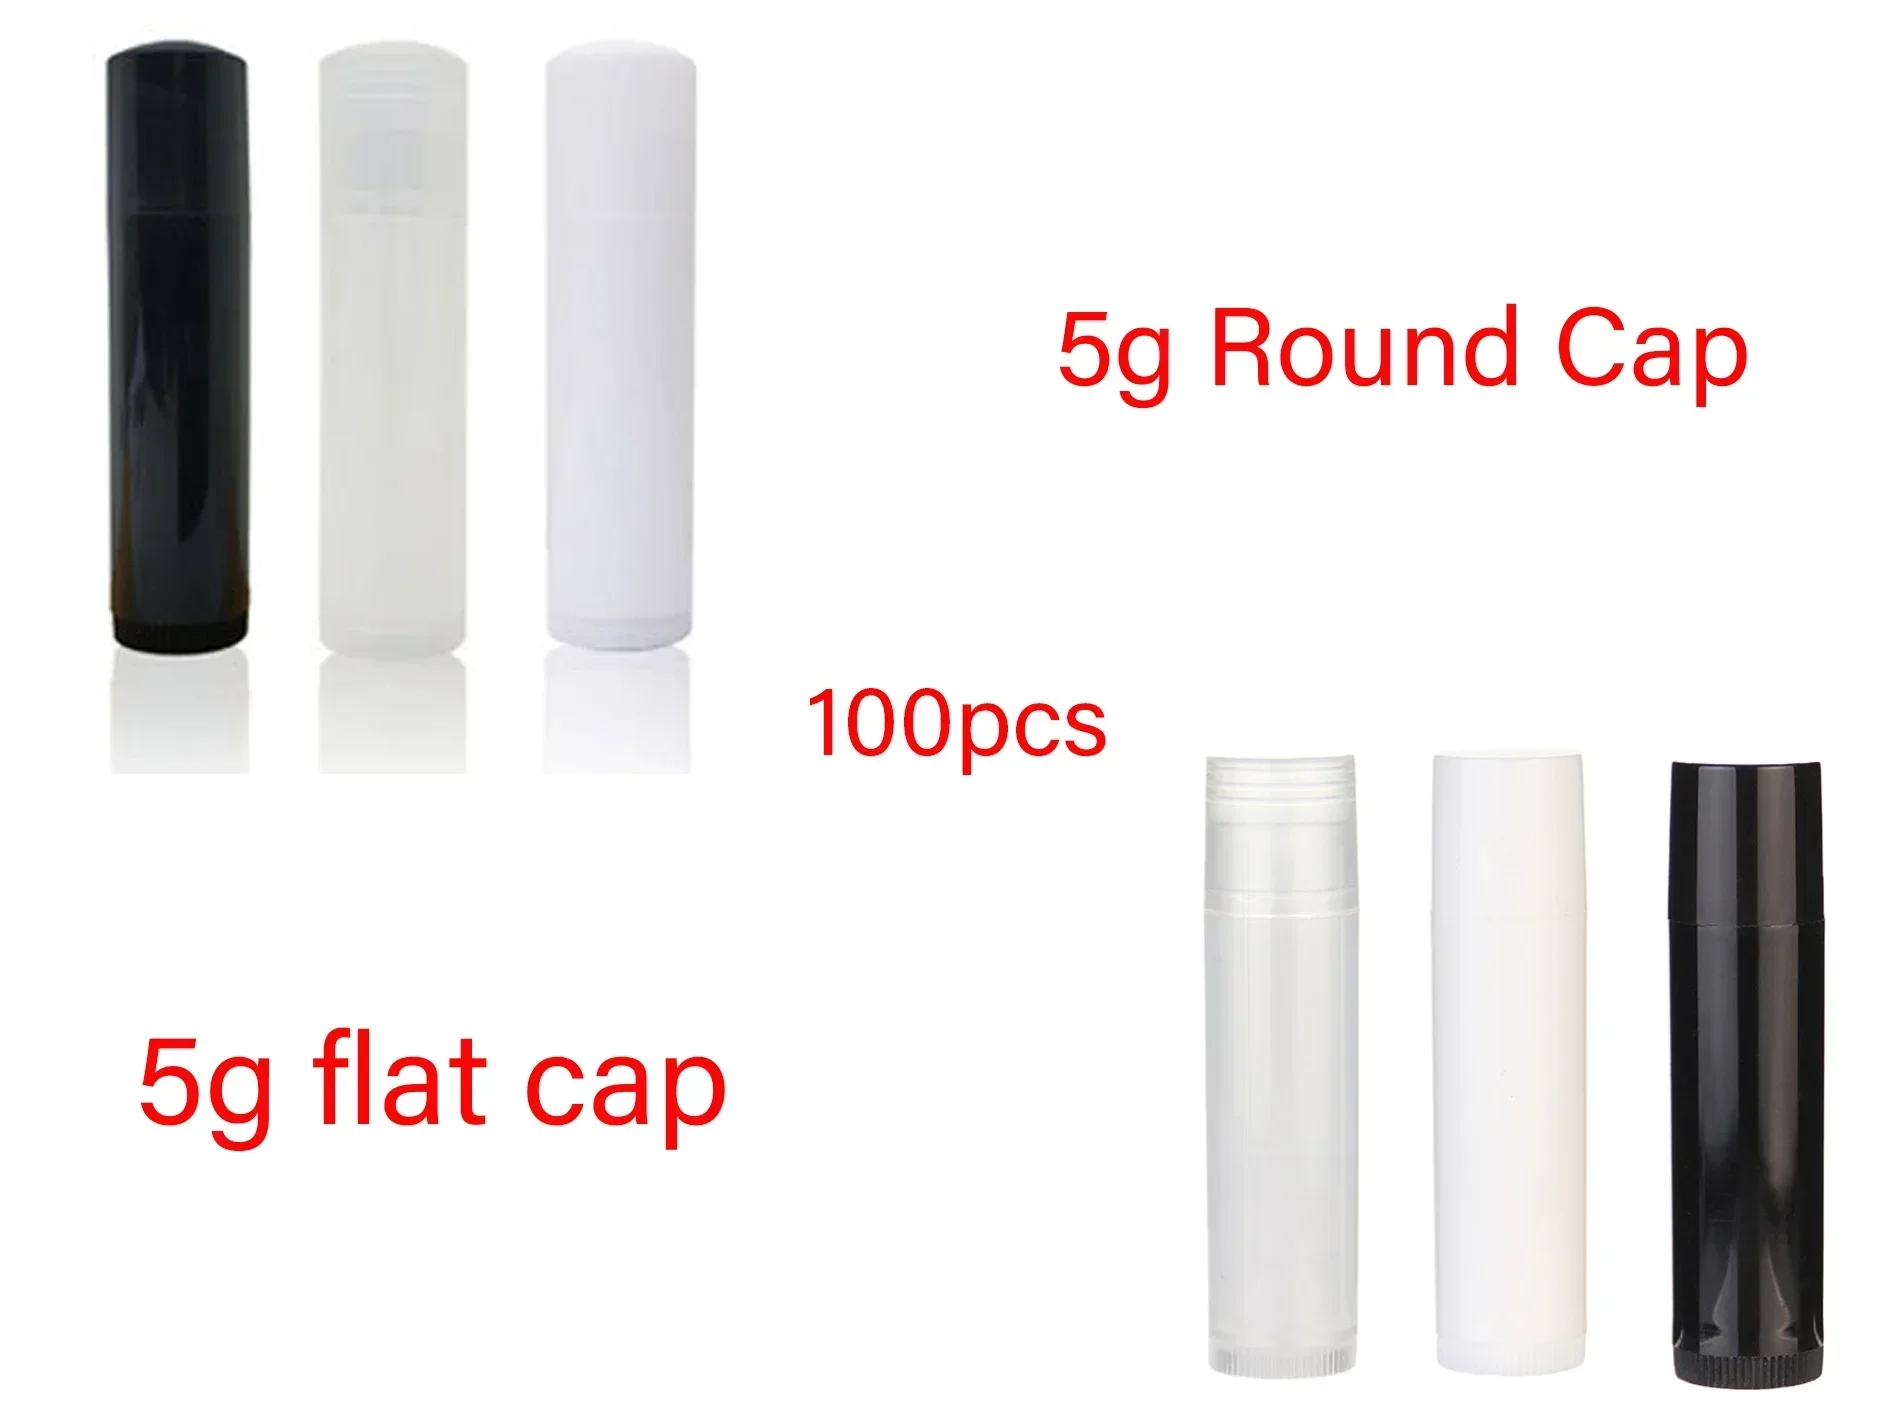 

50pcs 5ml Diy Empty Plastic Lip Gloss Tubes with Lids Women's Cosmetics Containers Travelling Dispenser Tool Bottles